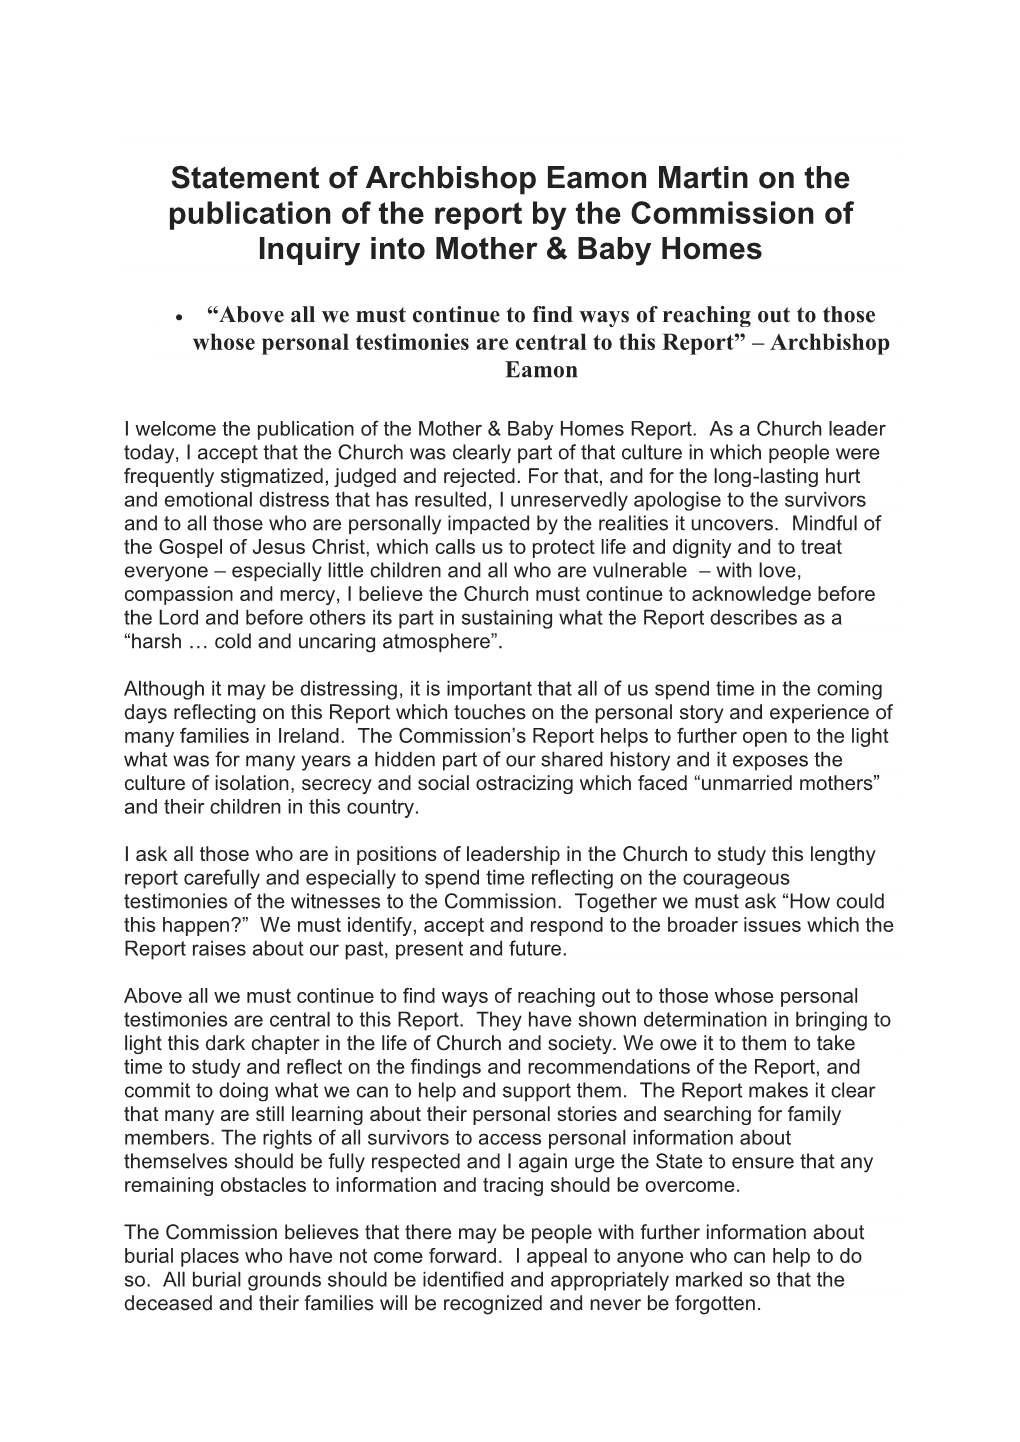 Statement of Archbishop Eamon Martin on the Publication of the Report by the Commission of Inquiry Into Mother & Baby Homes